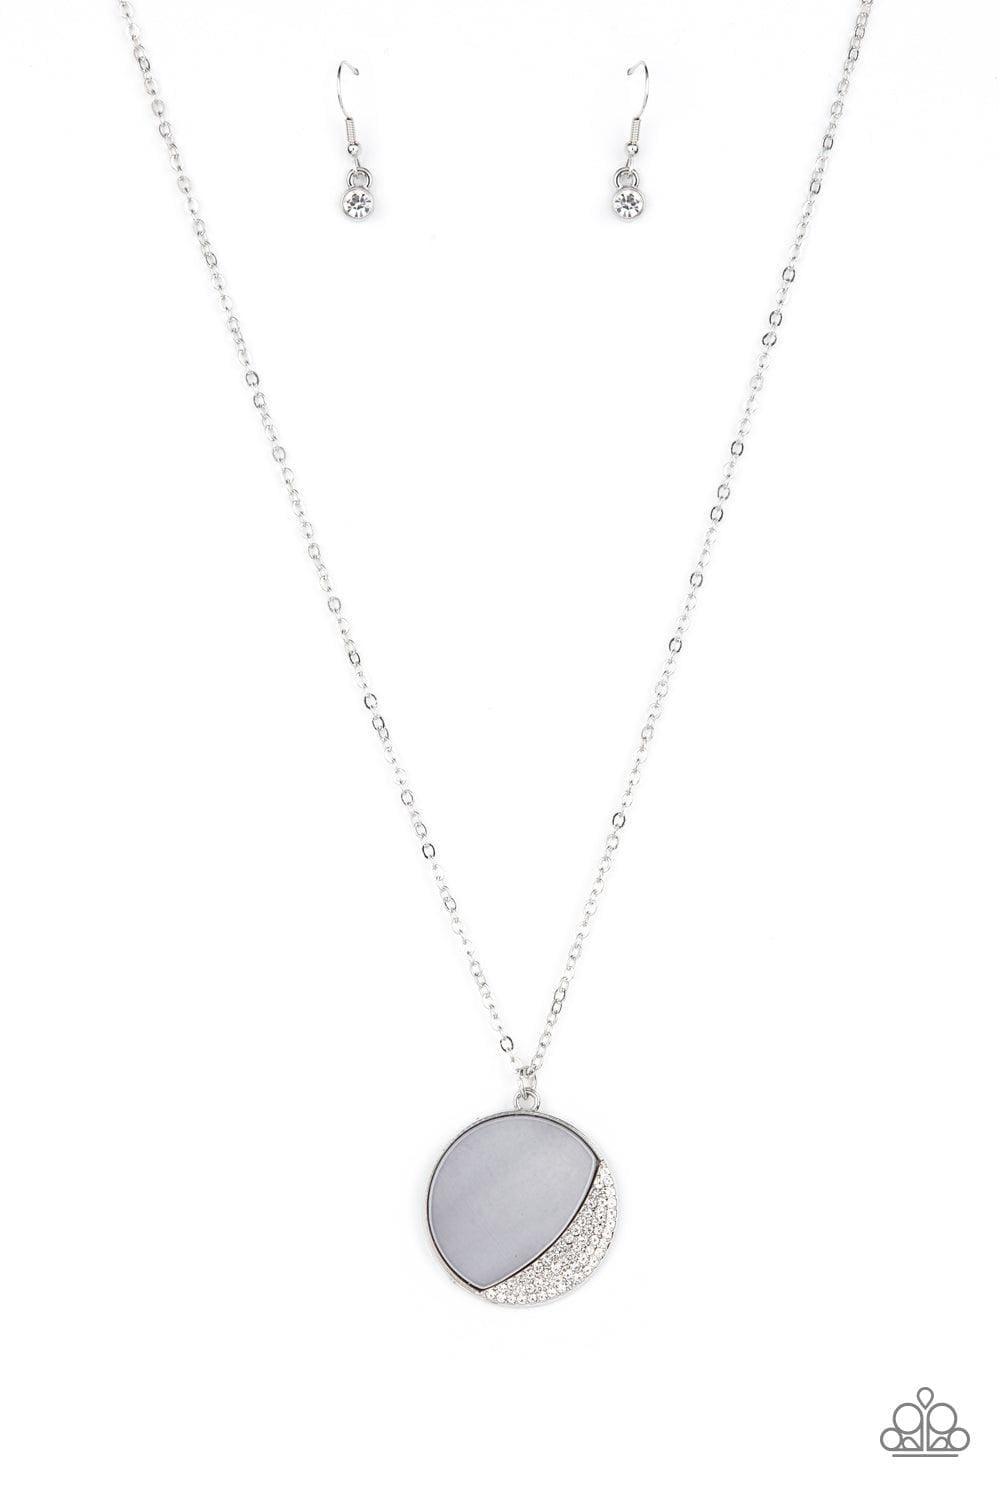 Paparazzi Accessories - Oceanic Eclipse - Silver Necklace - Bling by JessieK